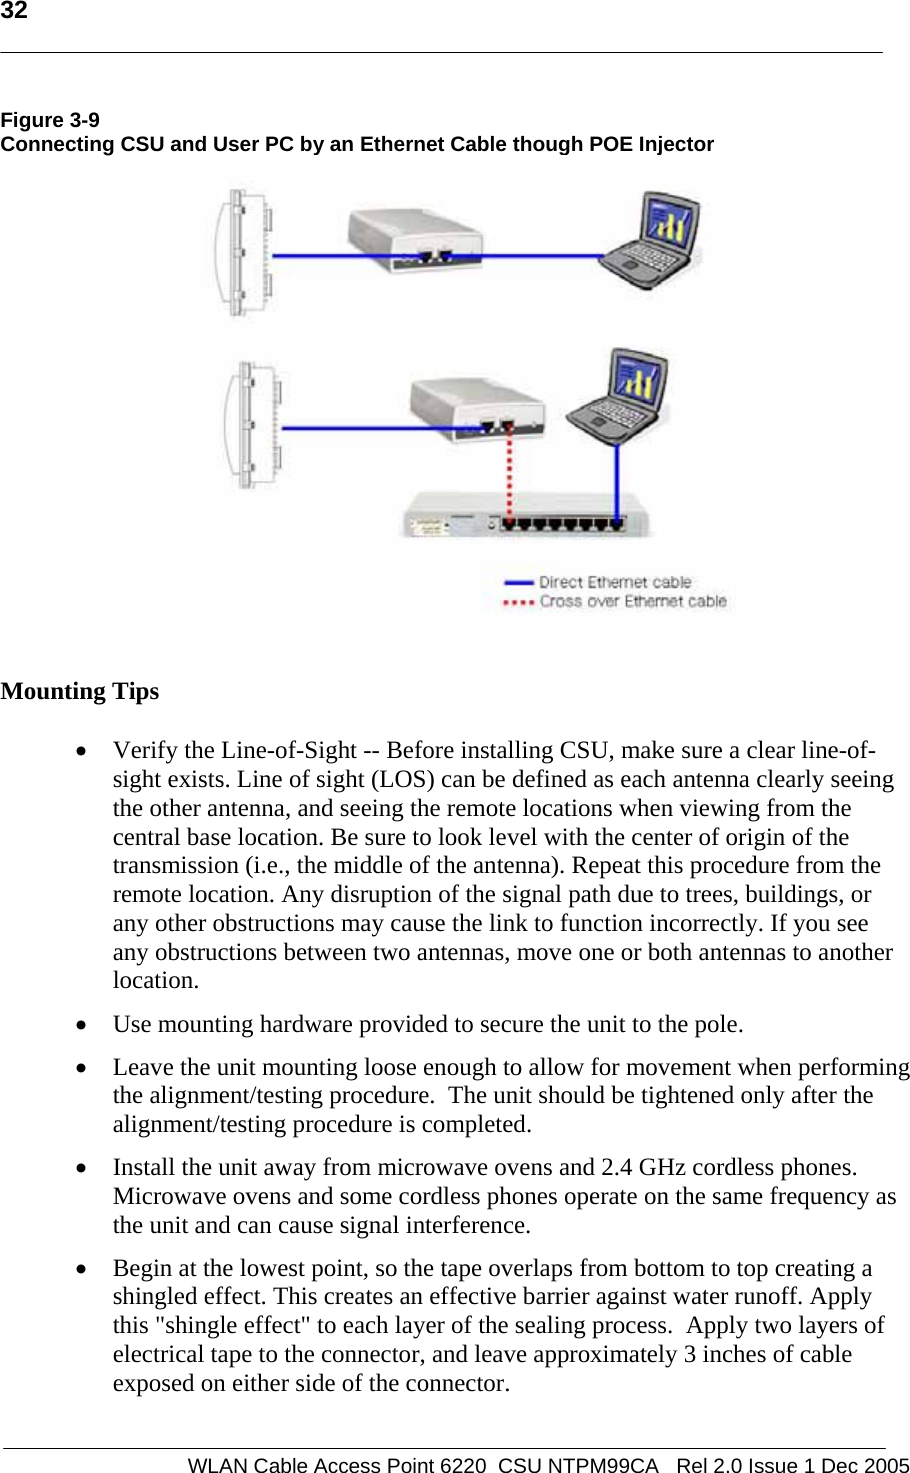   32    WLAN Cable Access Point 6220  CSU NTPM99CA   Rel 2.0 Issue 1 Dec 2005 Figure 3-9 Connecting CSU and User PC by an Ethernet Cable though POE Injector    Mounting Tips  • Verify the Line-of-Sight -- Before installing CSU, make sure a clear line-of-sight exists. Line of sight (LOS) can be defined as each antenna clearly seeing the other antenna, and seeing the remote locations when viewing from the central base location. Be sure to look level with the center of origin of the transmission (i.e., the middle of the antenna). Repeat this procedure from the remote location. Any disruption of the signal path due to trees, buildings, or any other obstructions may cause the link to function incorrectly. If you see any obstructions between two antennas, move one or both antennas to another location. • Use mounting hardware provided to secure the unit to the pole.   • Leave the unit mounting loose enough to allow for movement when performing the alignment/testing procedure.  The unit should be tightened only after the alignment/testing procedure is completed.  • Install the unit away from microwave ovens and 2.4 GHz cordless phones. Microwave ovens and some cordless phones operate on the same frequency as the unit and can cause signal interference. • Begin at the lowest point, so the tape overlaps from bottom to top creating a shingled effect. This creates an effective barrier against water runoff. Apply this &quot;shingle effect&quot; to each layer of the sealing process.  Apply two layers of electrical tape to the connector, and leave approximately 3 inches of cable exposed on either side of the connector.  